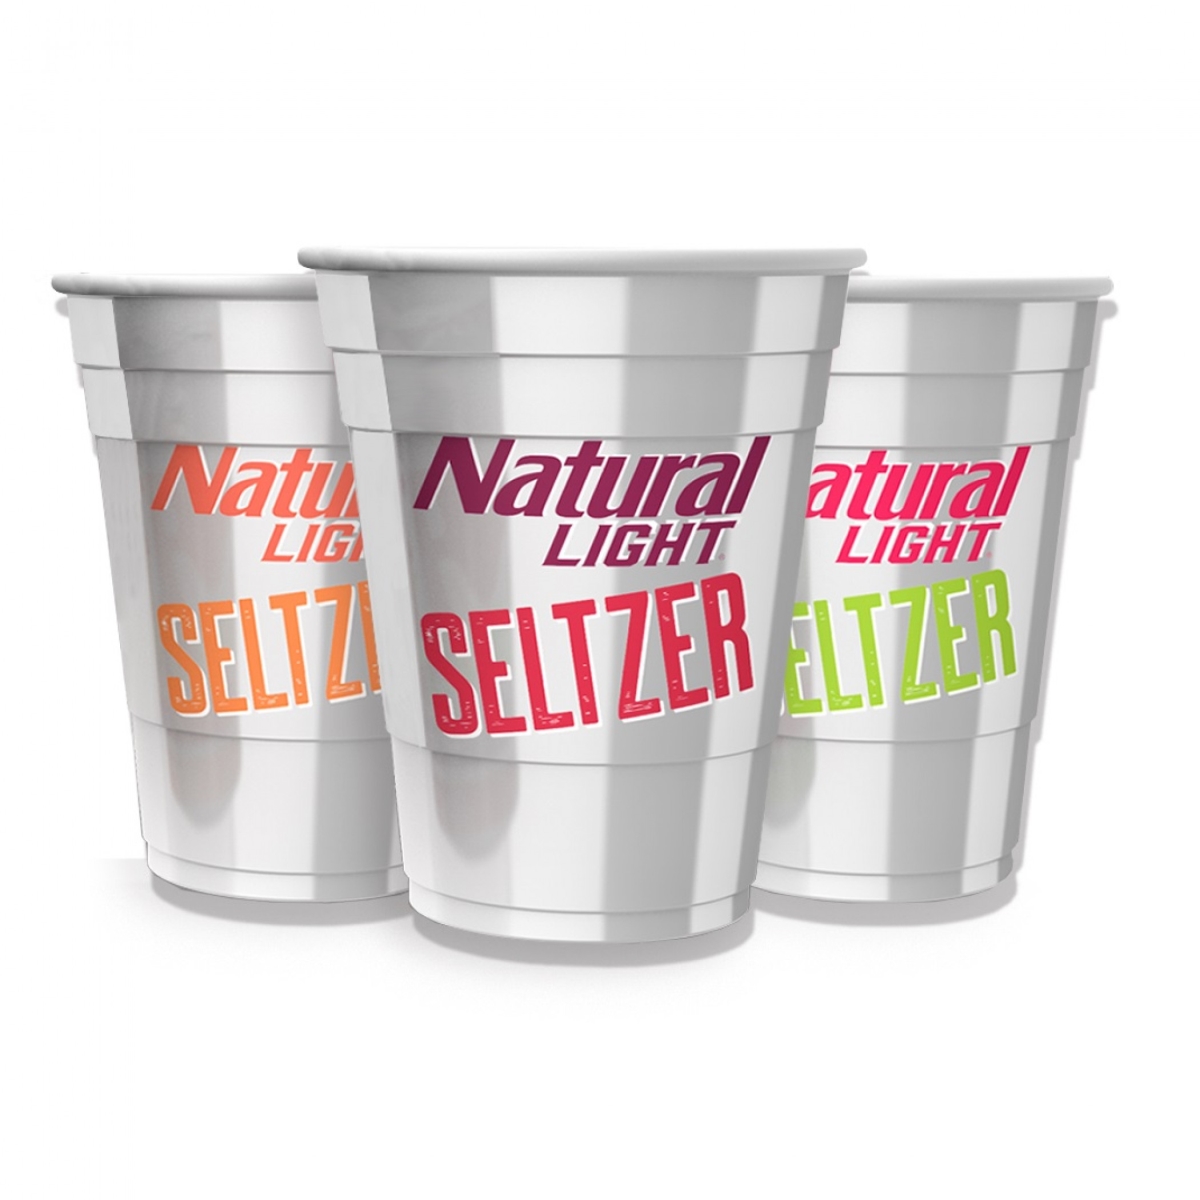 Picture of Natural Light 811464 Natural Light Seltzer Reusable Plastic Cups - Pack of 3